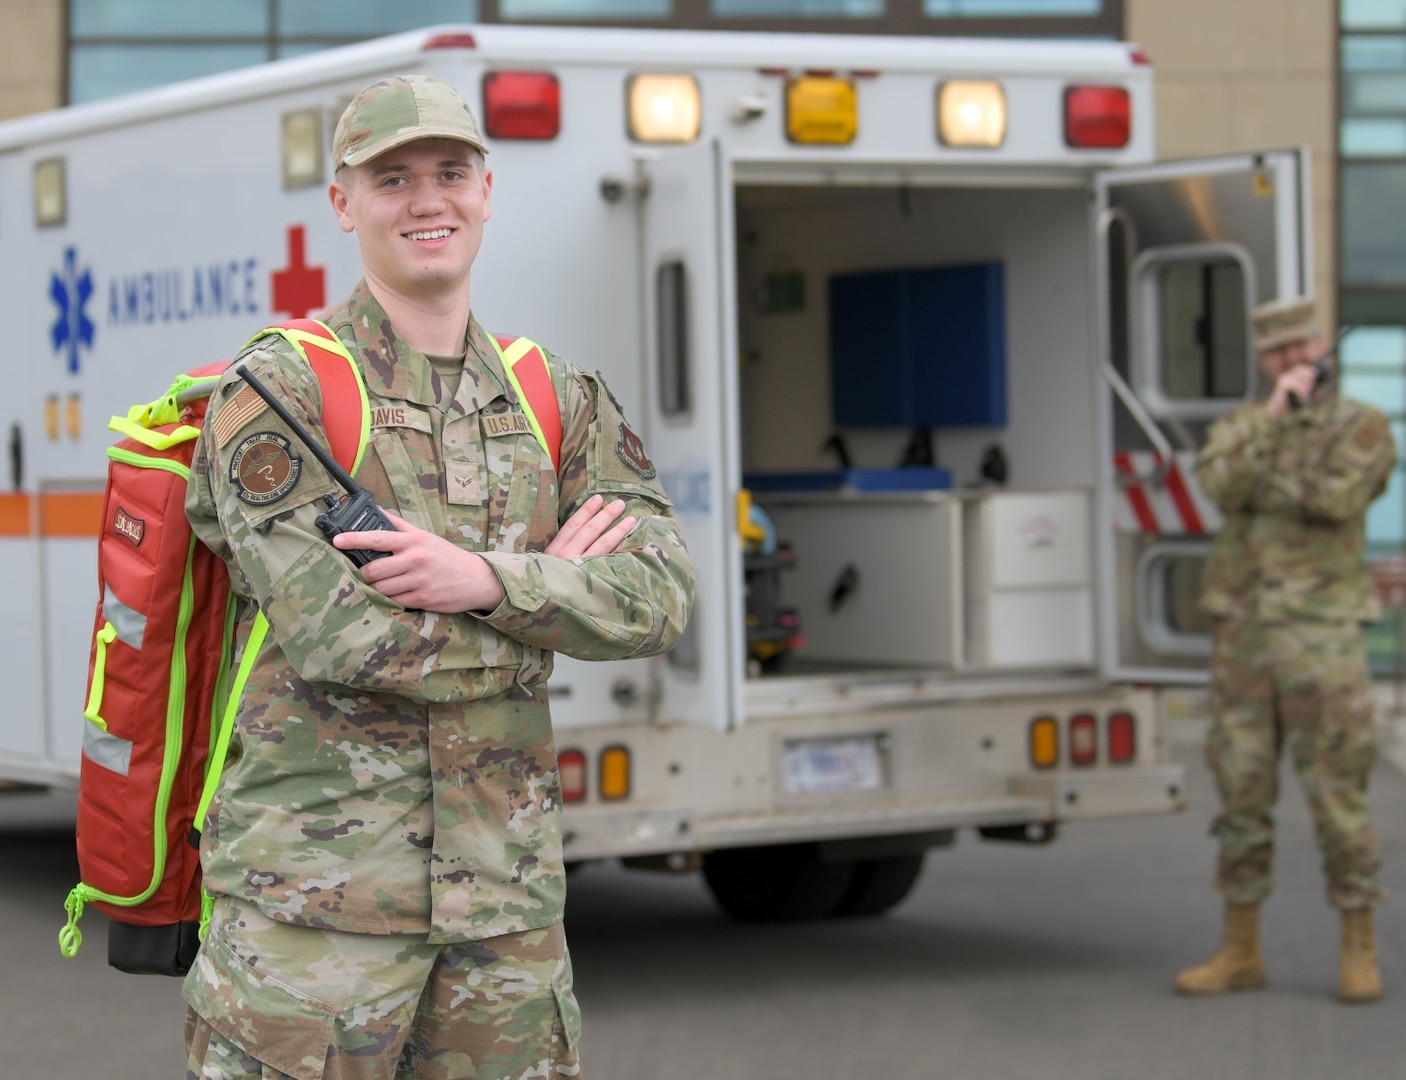 Air Force emergency medical technician stands in front of the back of an ambulance